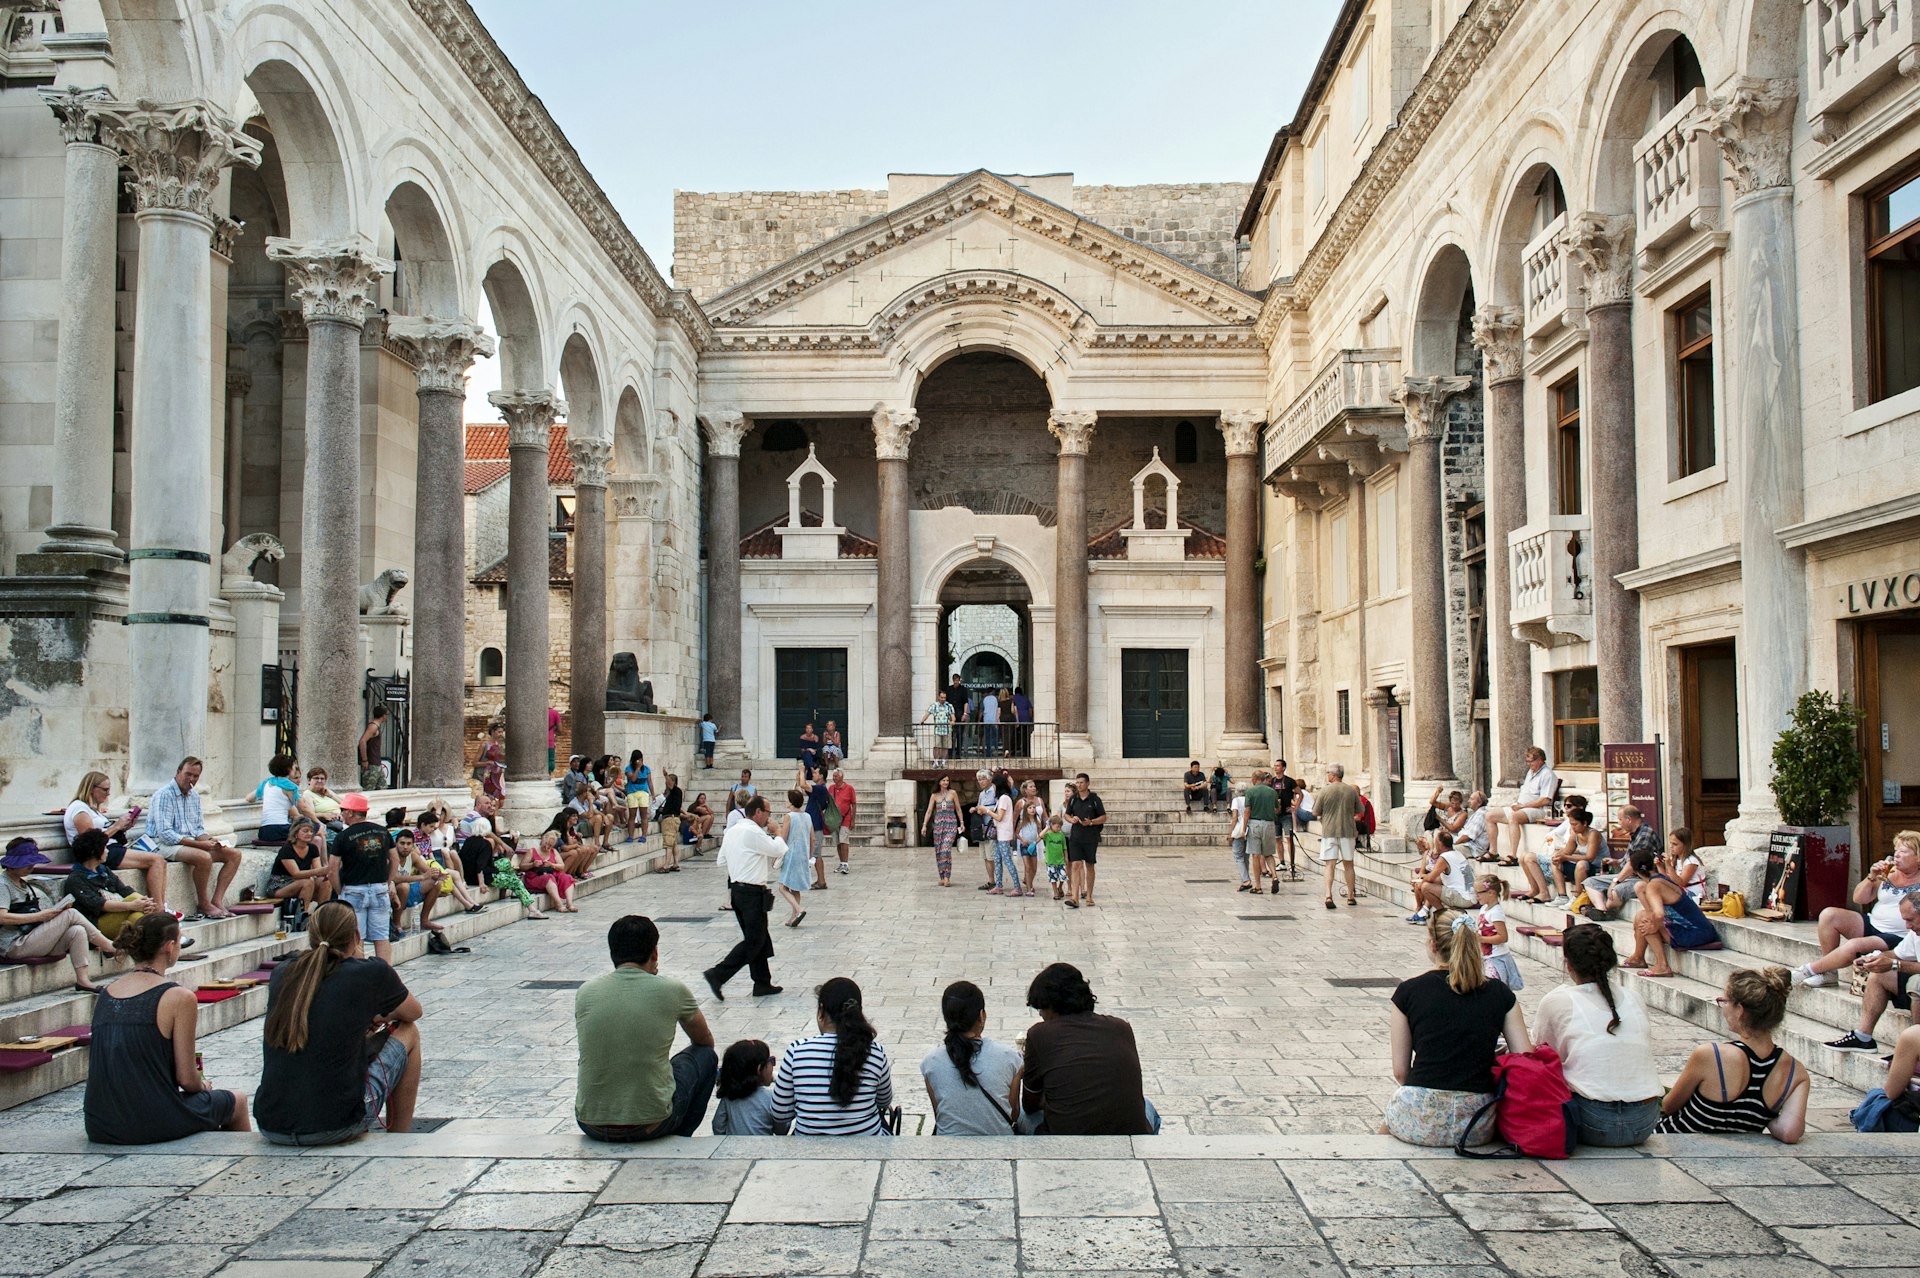 The  courtyard at Diocletian's Palace in Split.